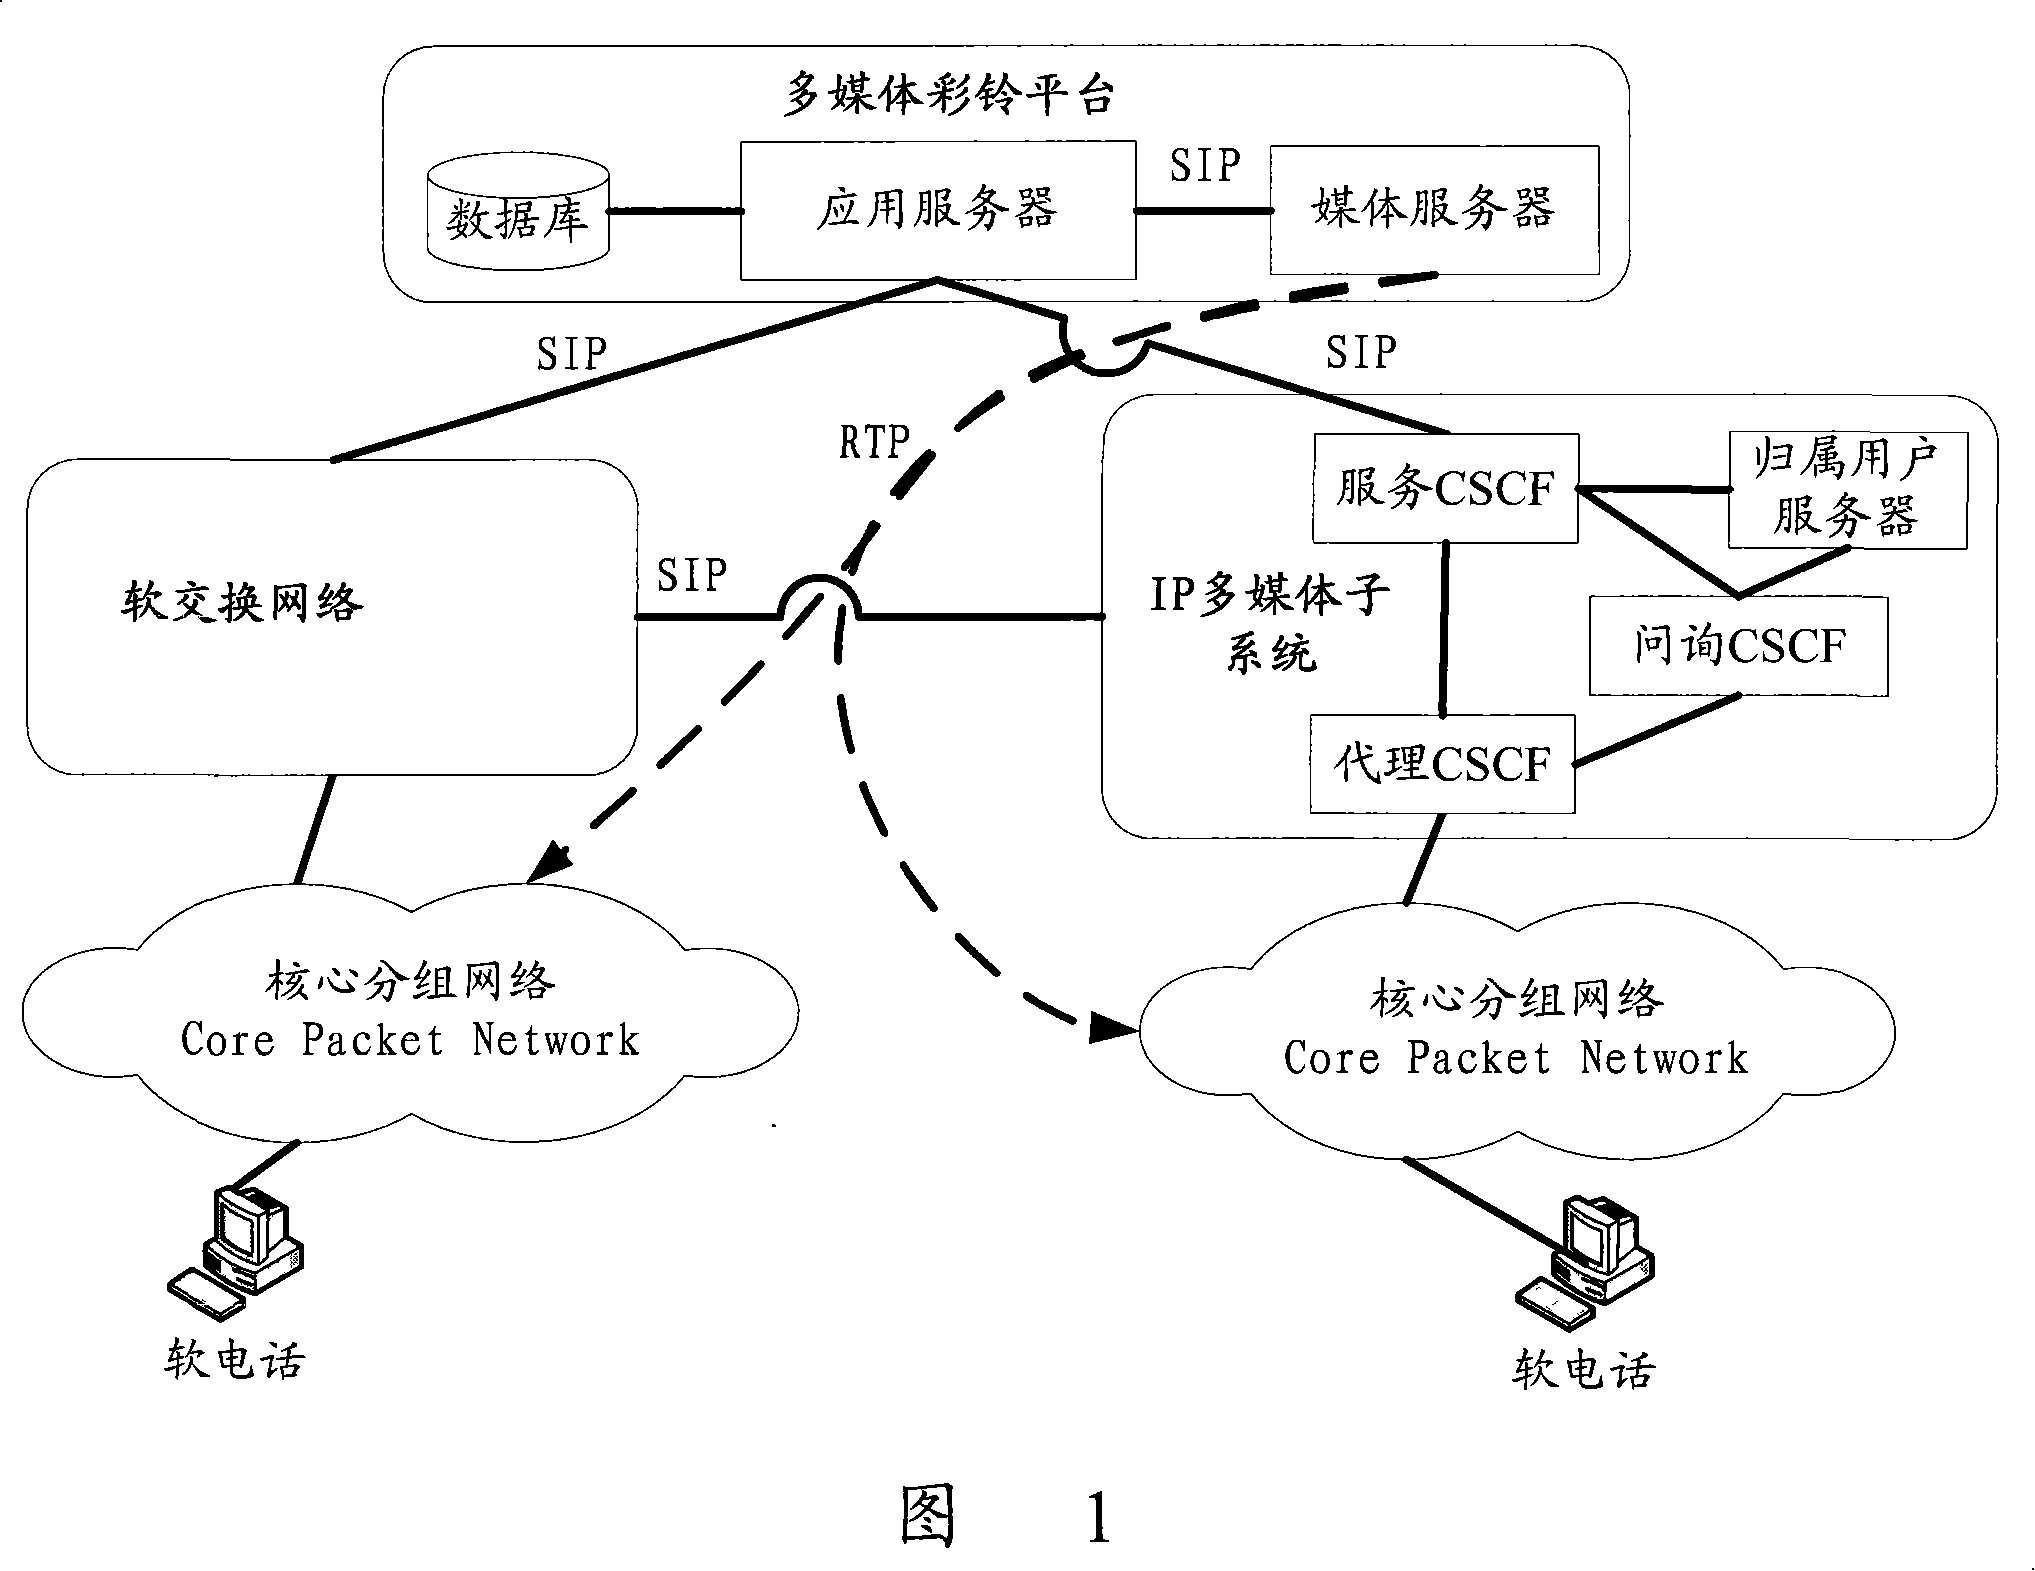 Multimedia color bell service implementing method